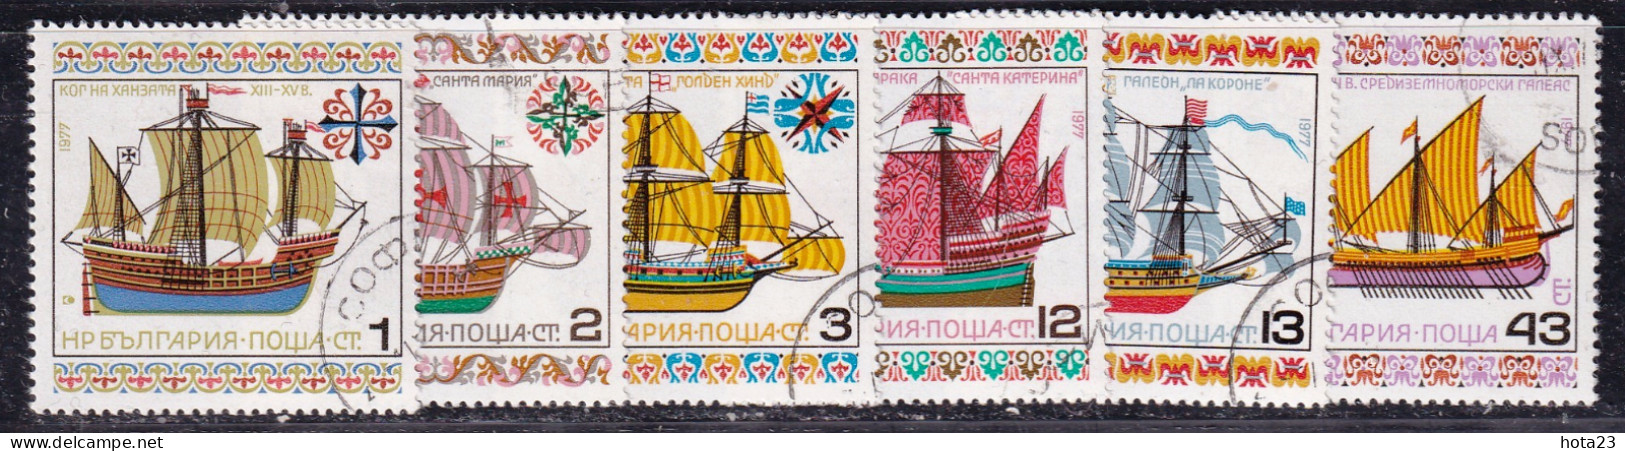 Bulgaria Michel 2619-2624 Historical Ships 1977  Used - Used Stamps